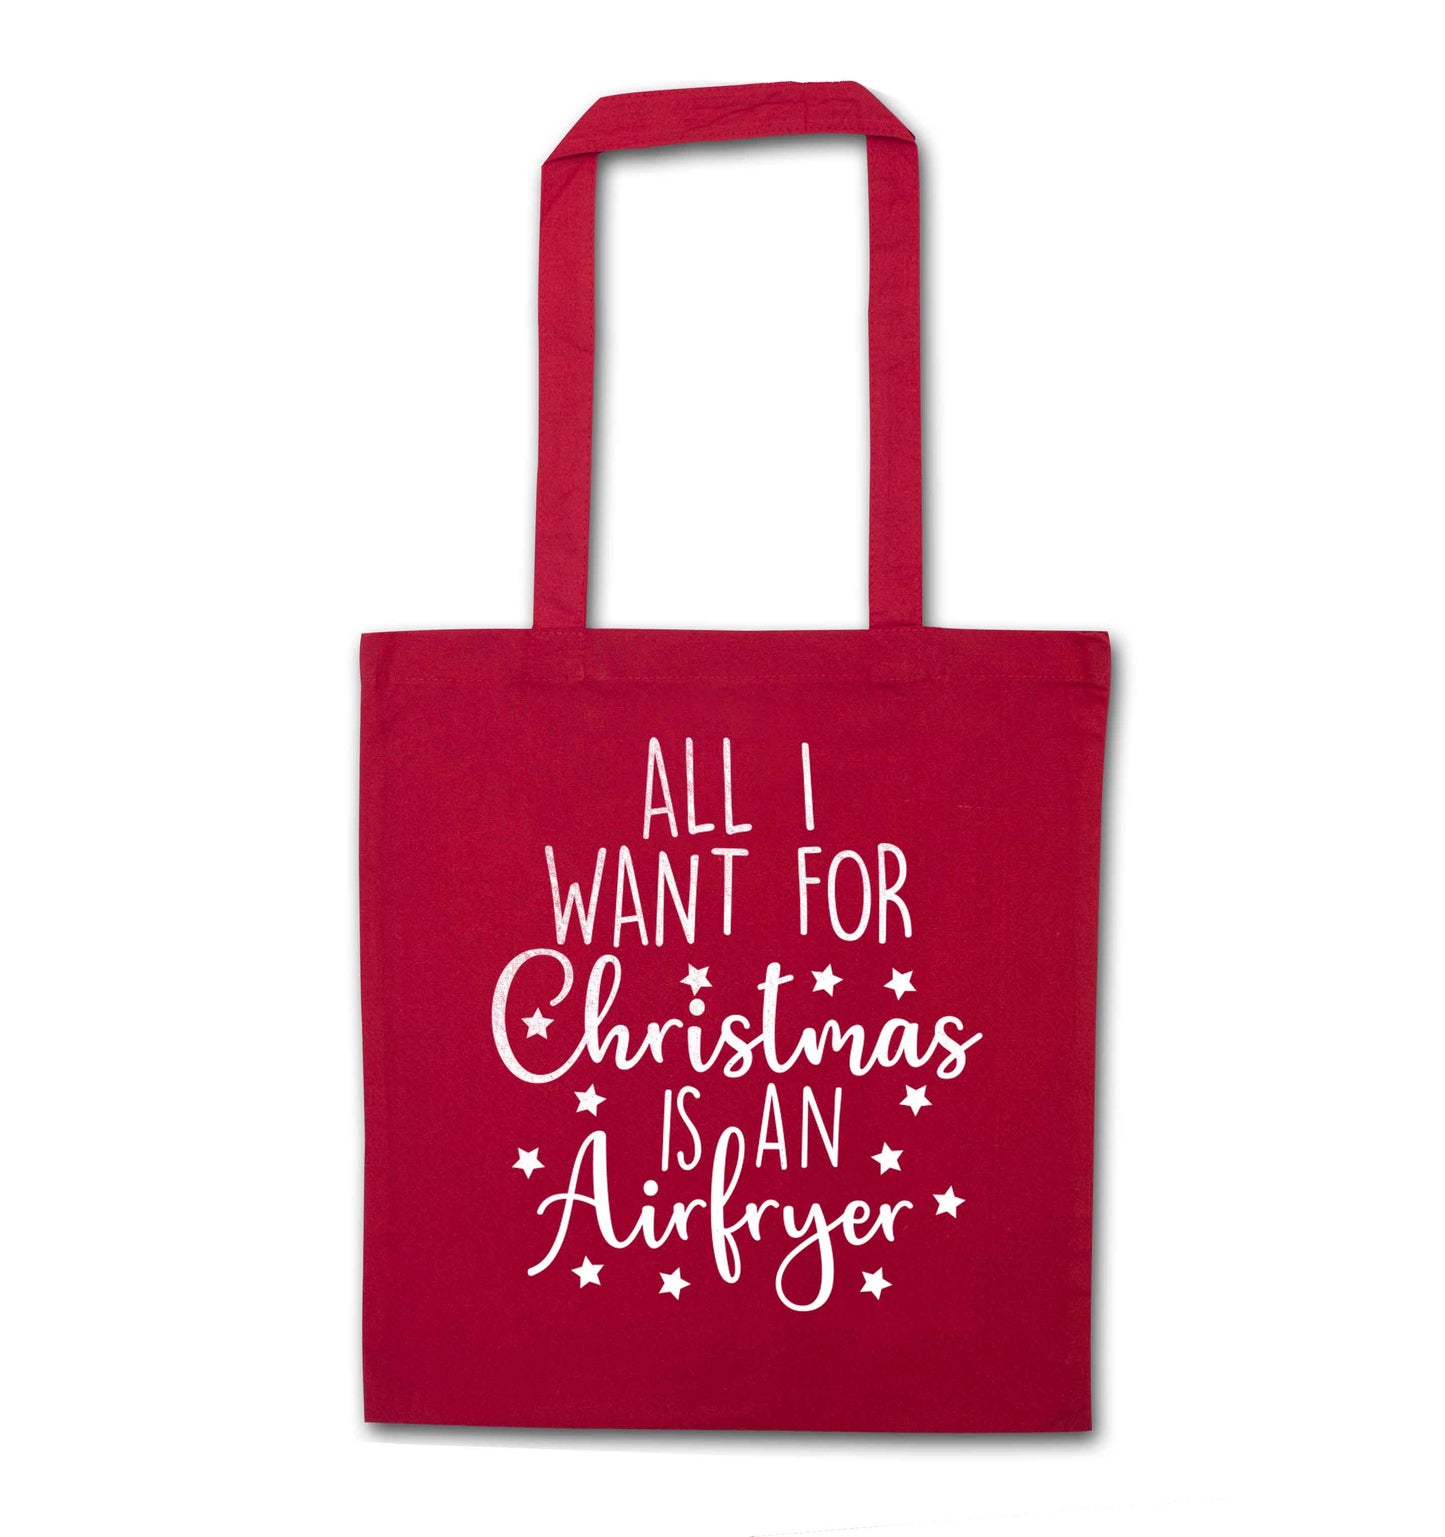 All I want for Christmas is an airfryerred tote bag